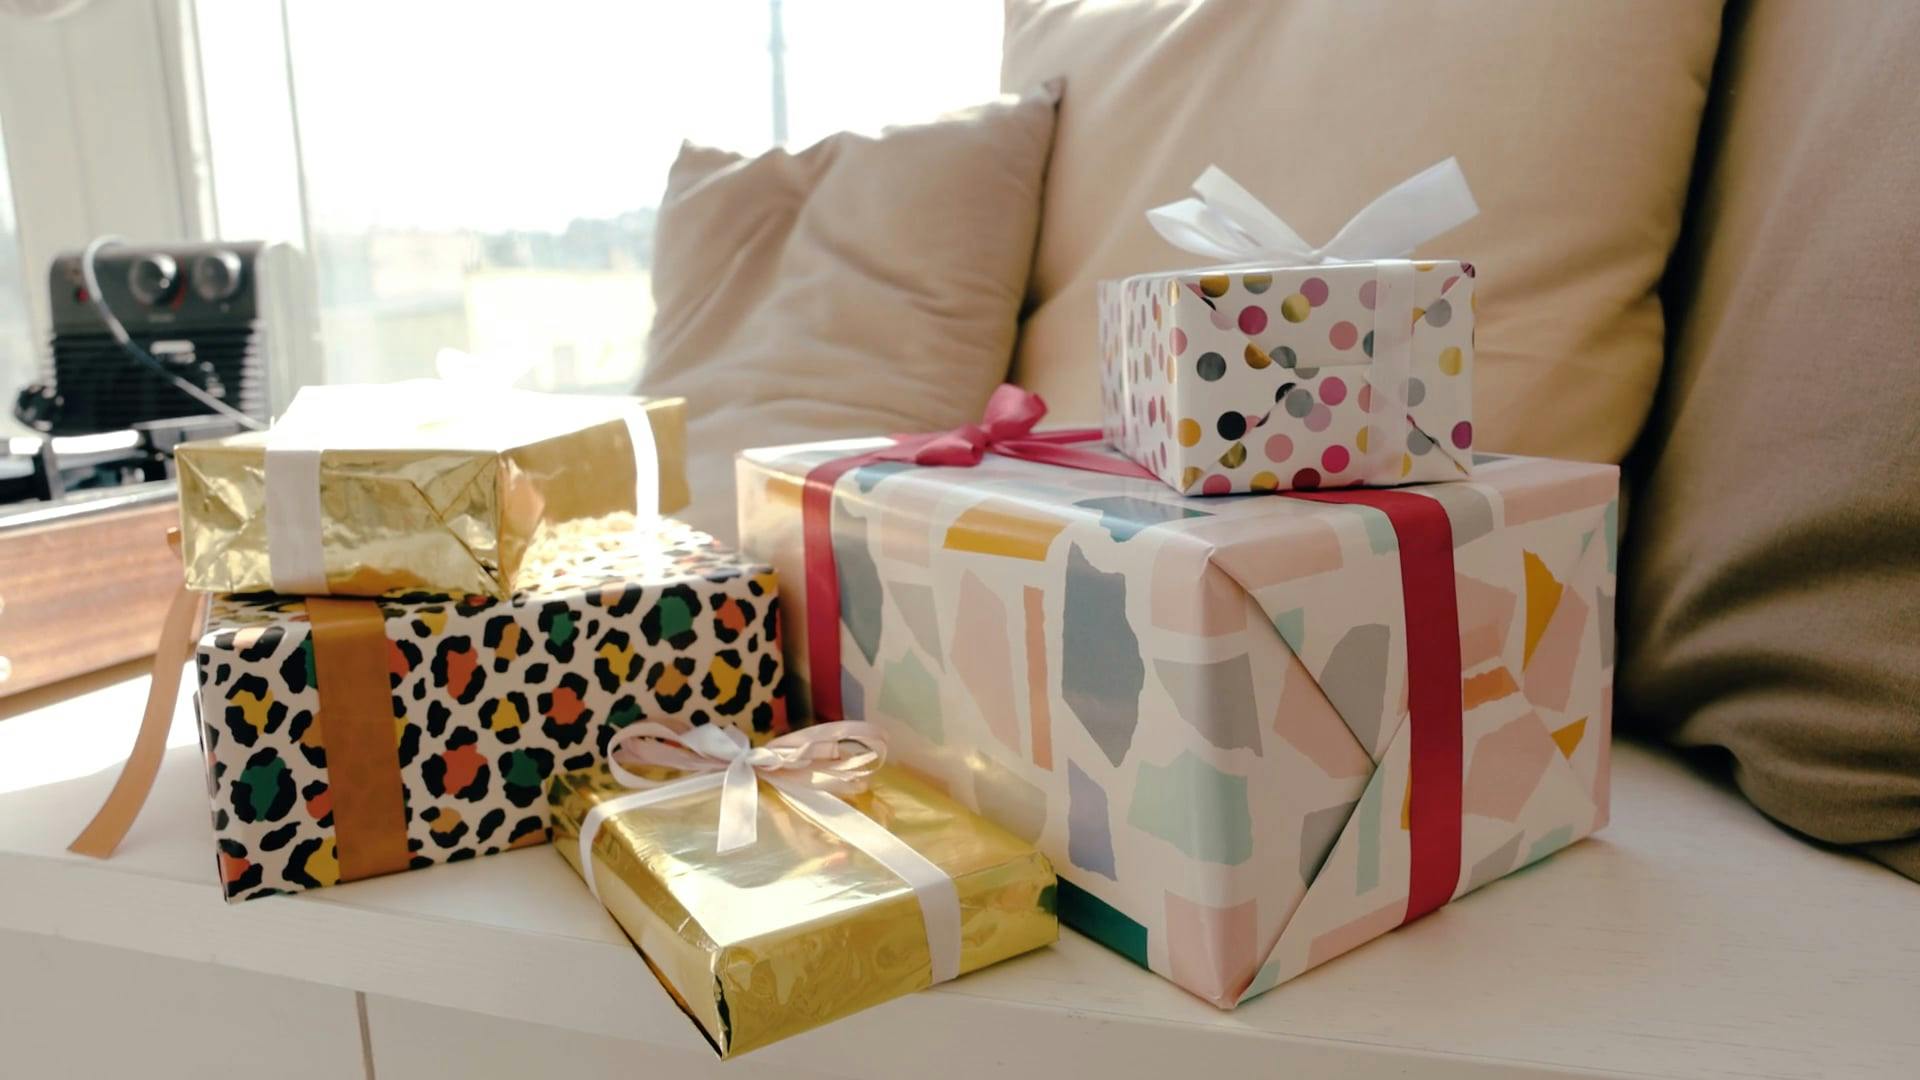 HD wallpaper: Wrapped Present Photo, Gifts, Box, Happy Birthday, Celebrate  | Wallpaper Flare